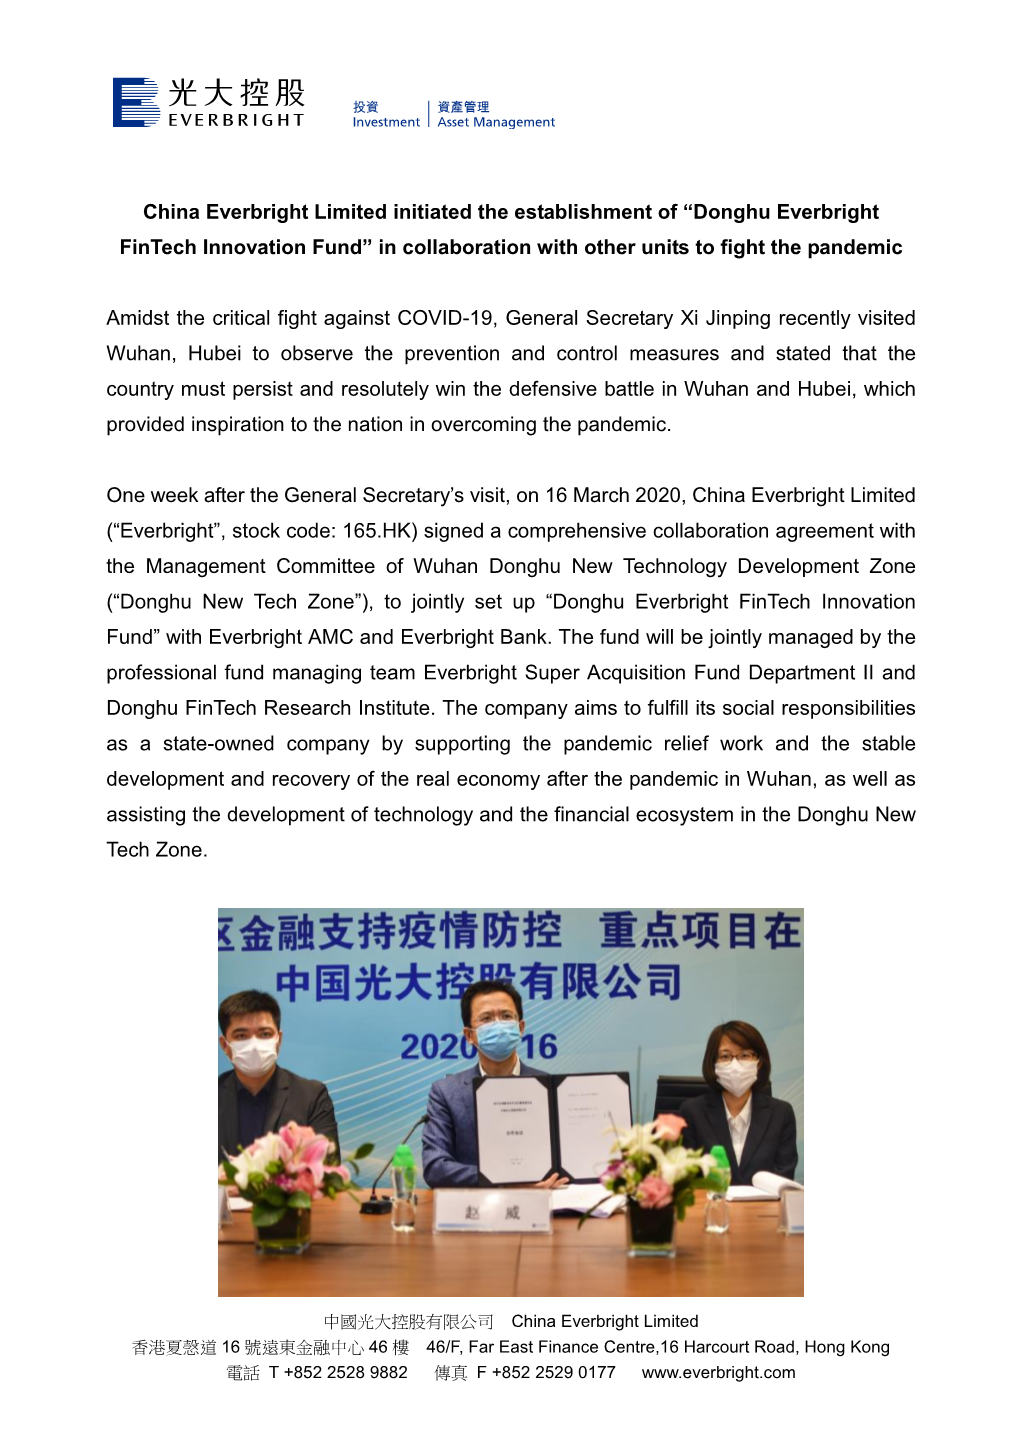 Donghu Everbright Fintech Innovation Fund” in Collaboration with Other Units to Fight the Pandemic